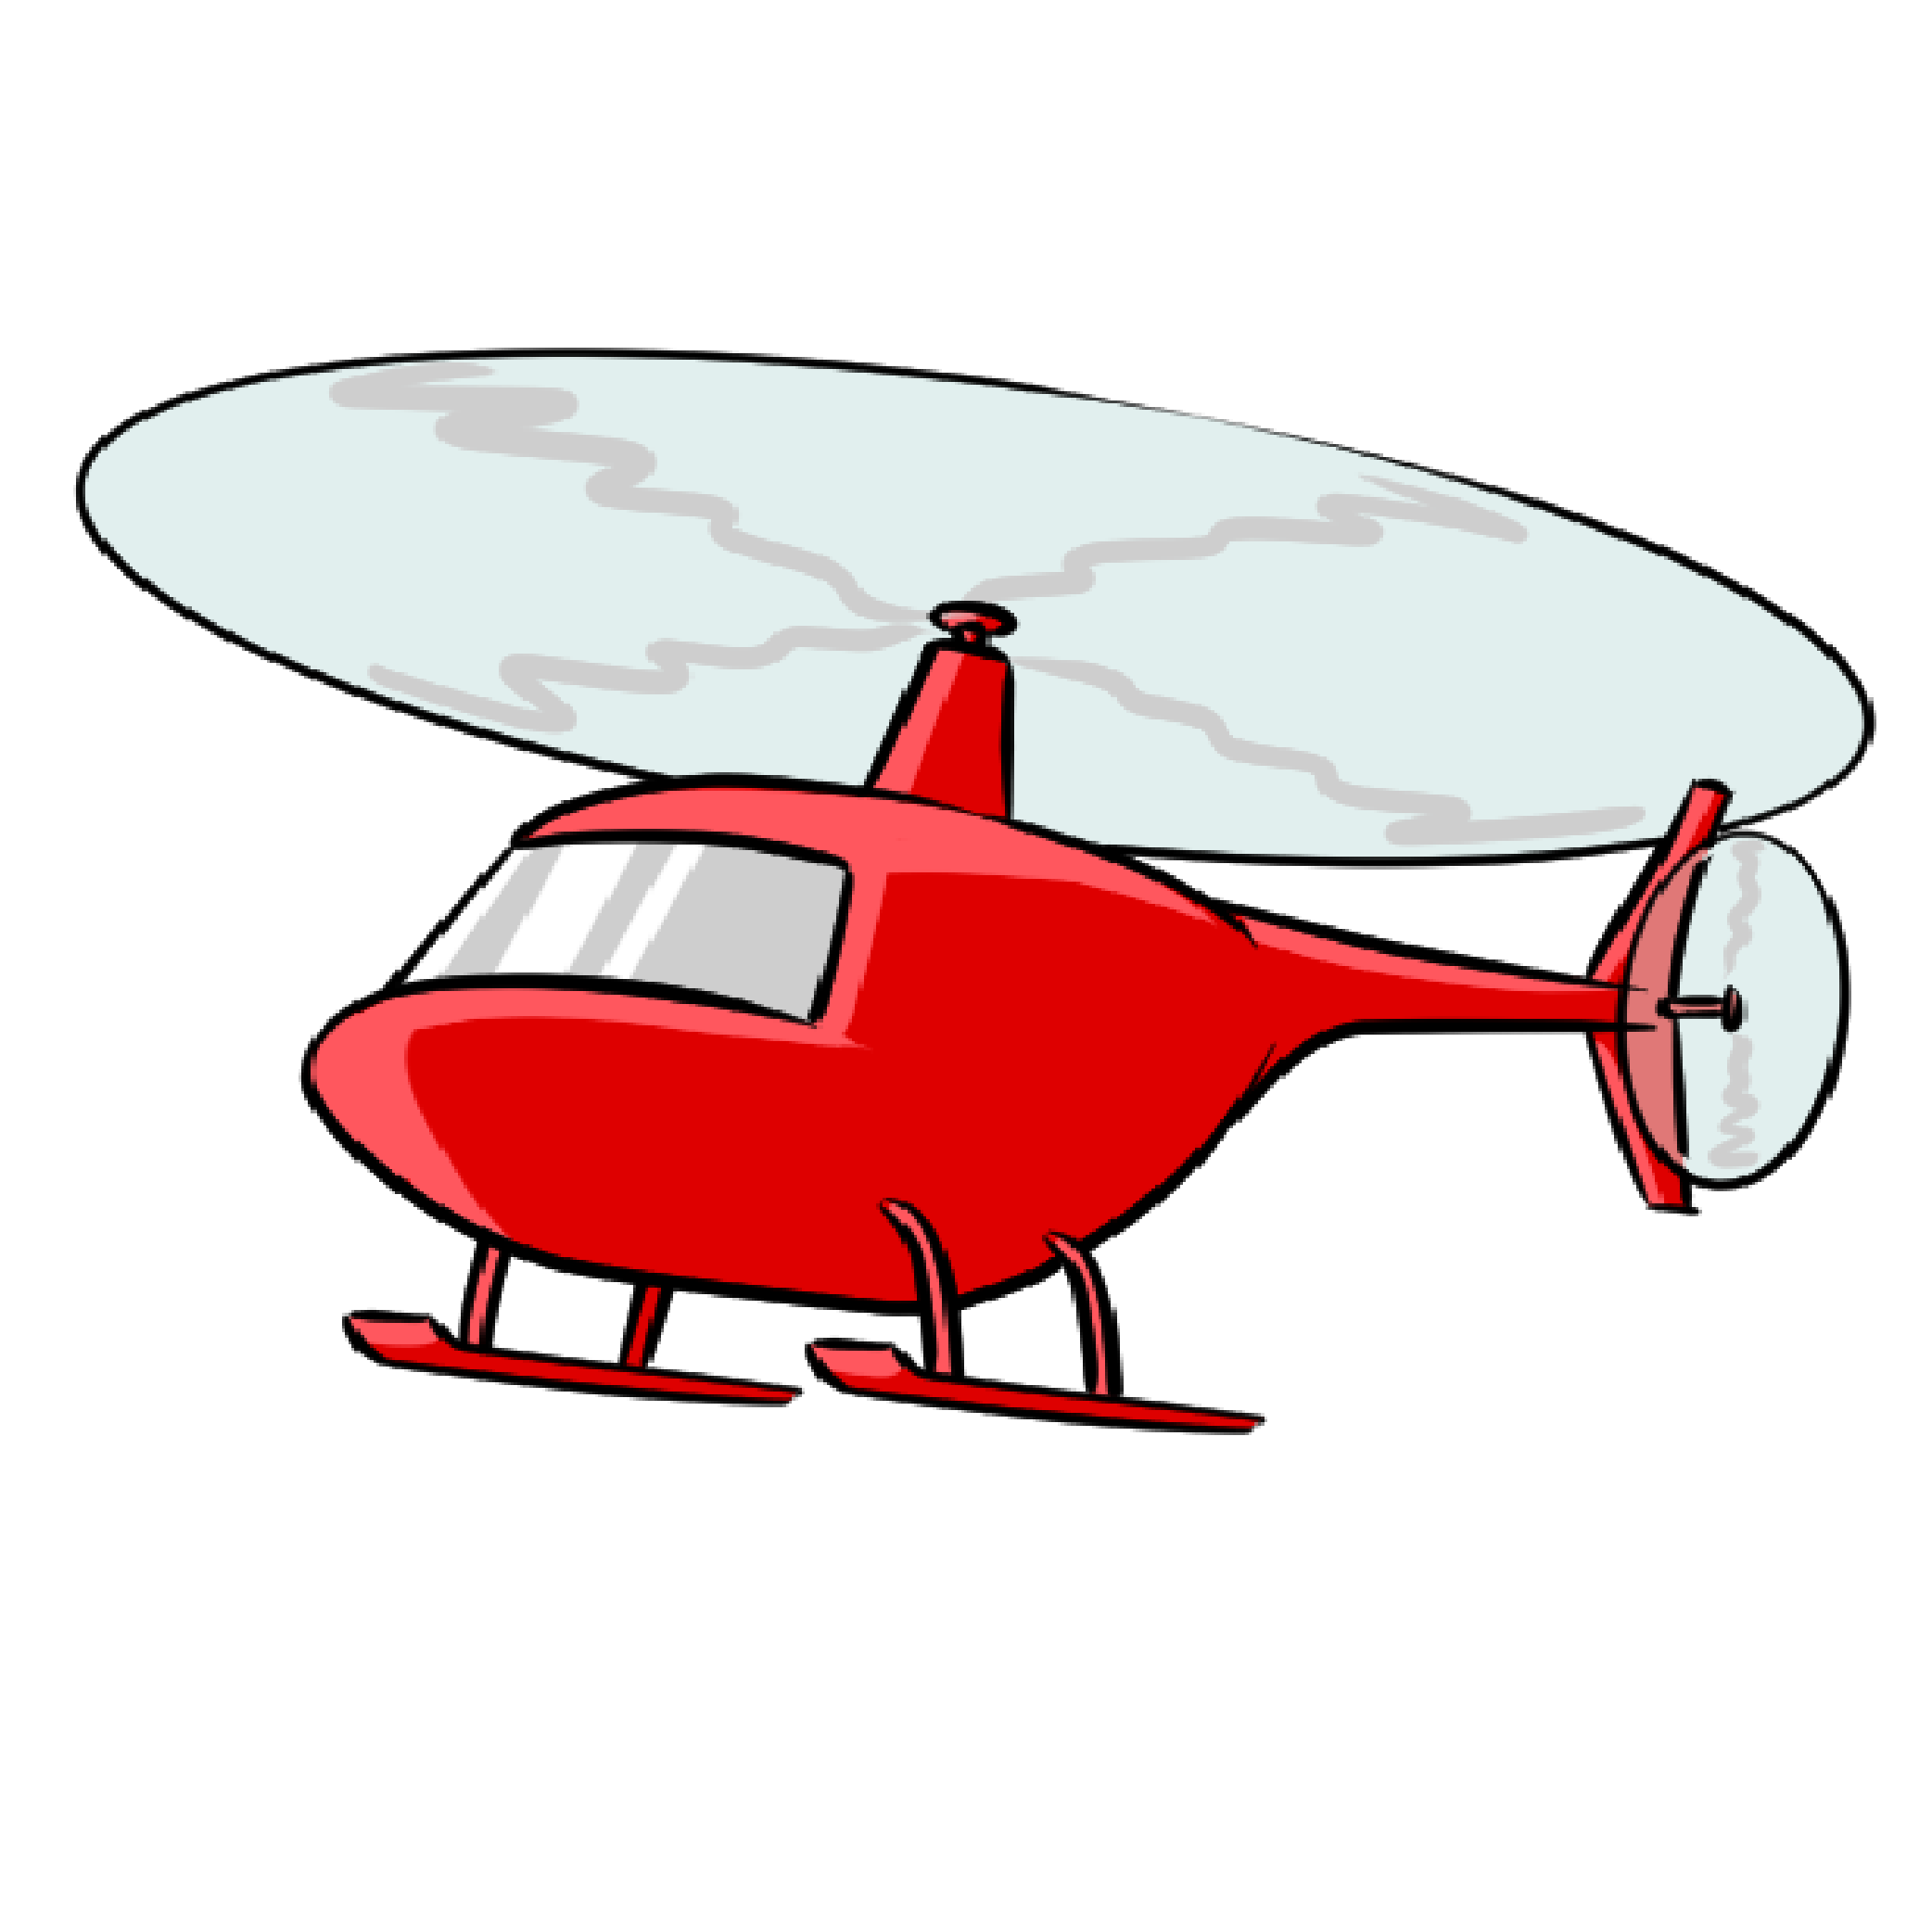 a cartoon illustration of a red helicopter